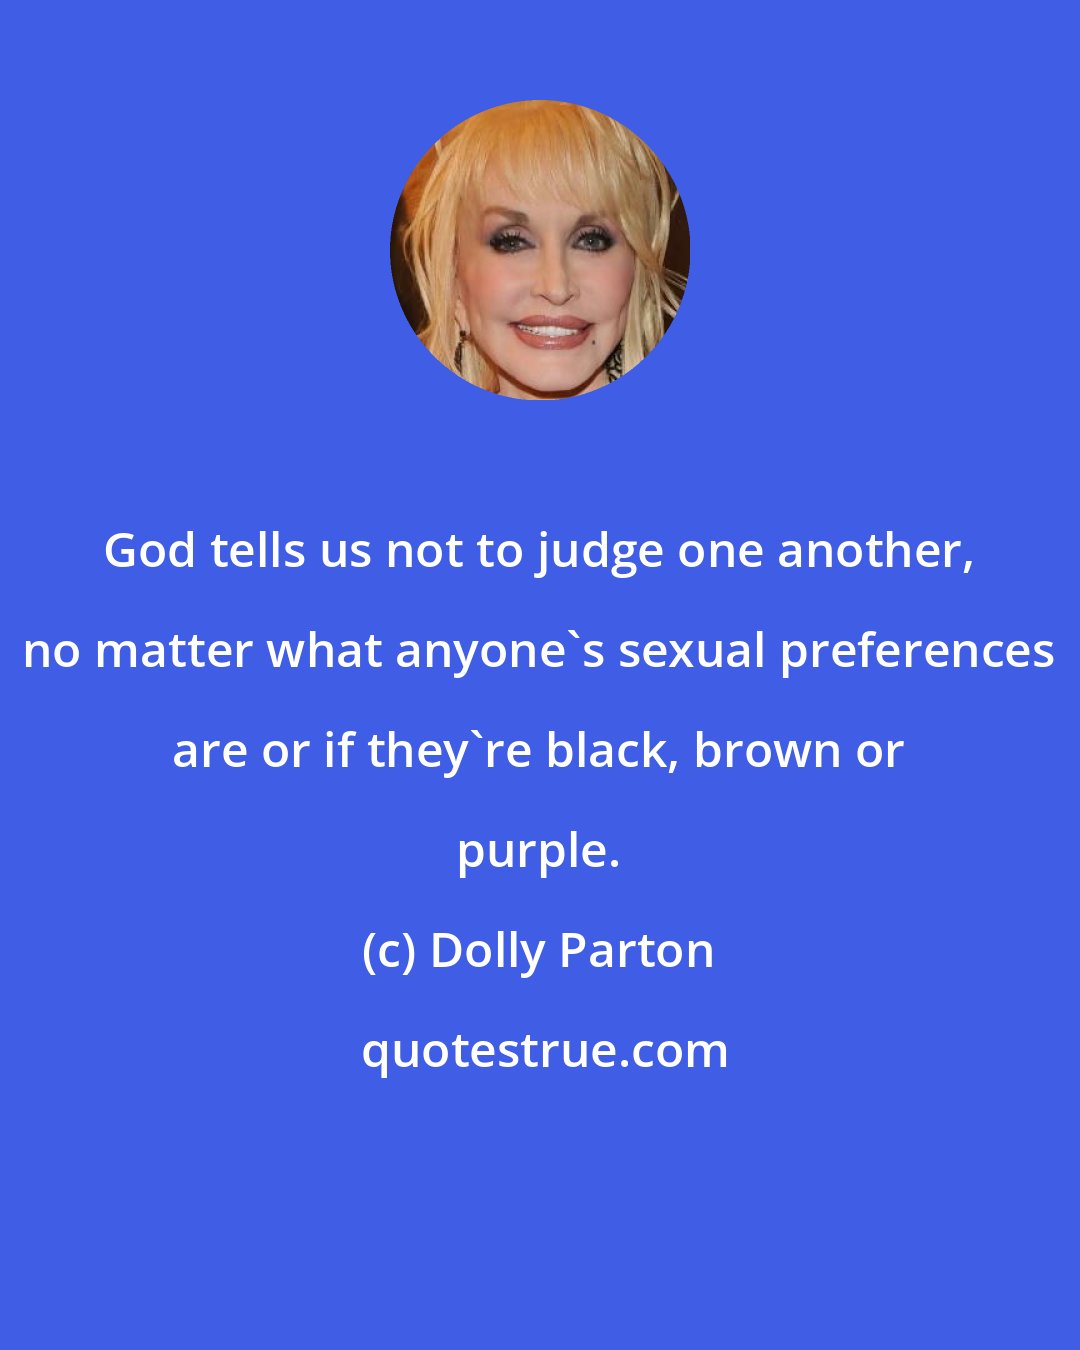 Dolly Parton: God tells us not to judge one another, no matter what anyone's sexual preferences are or if they're black, brown or purple.